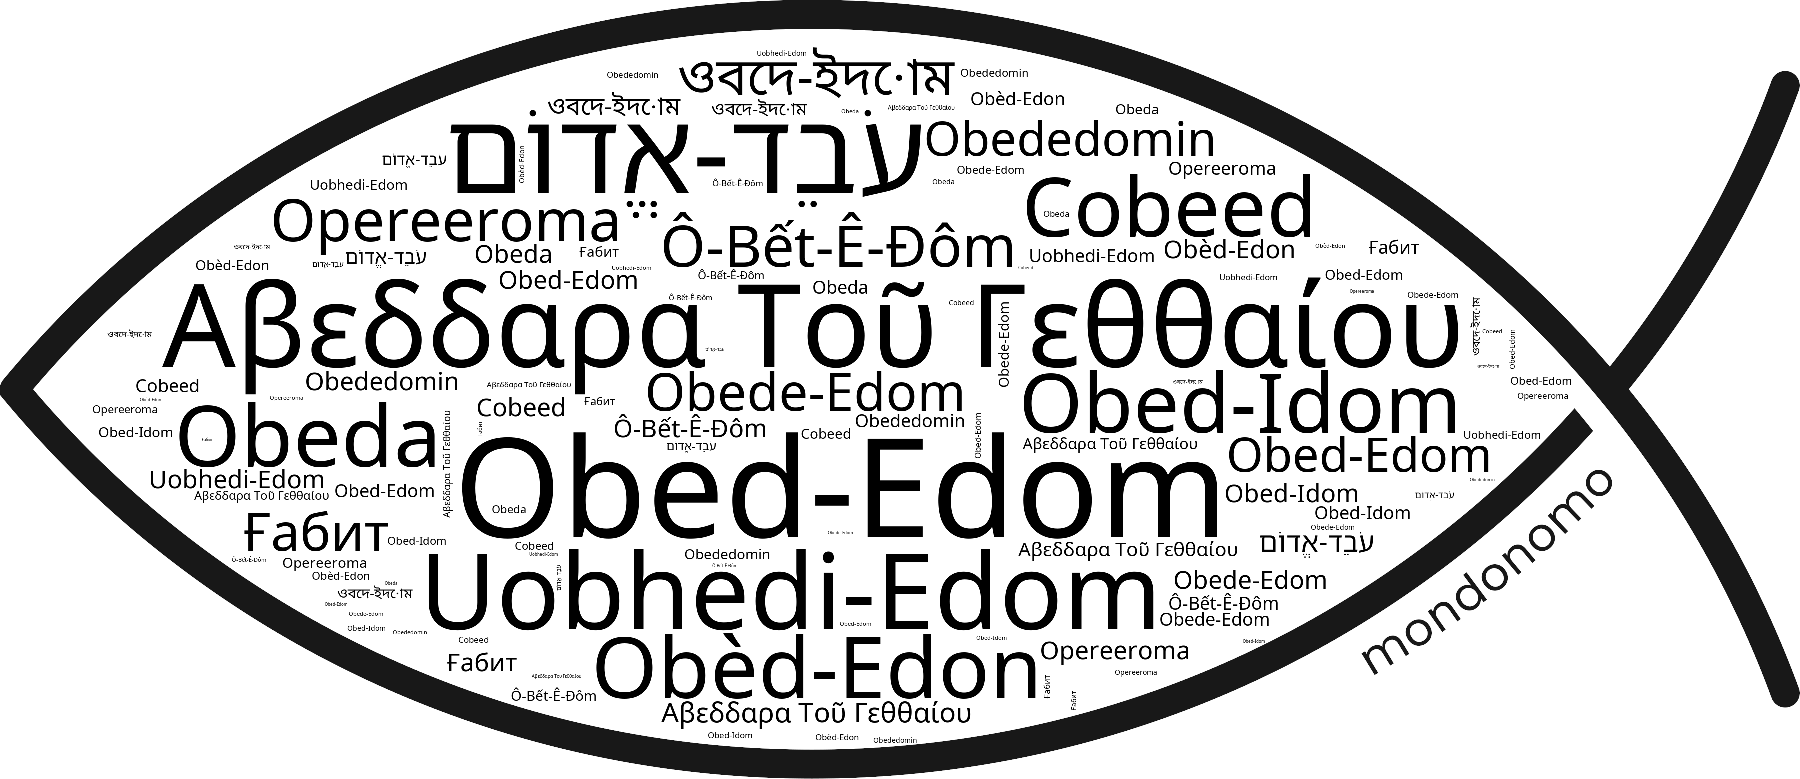 Name Obed-Edom in the world's Bibles